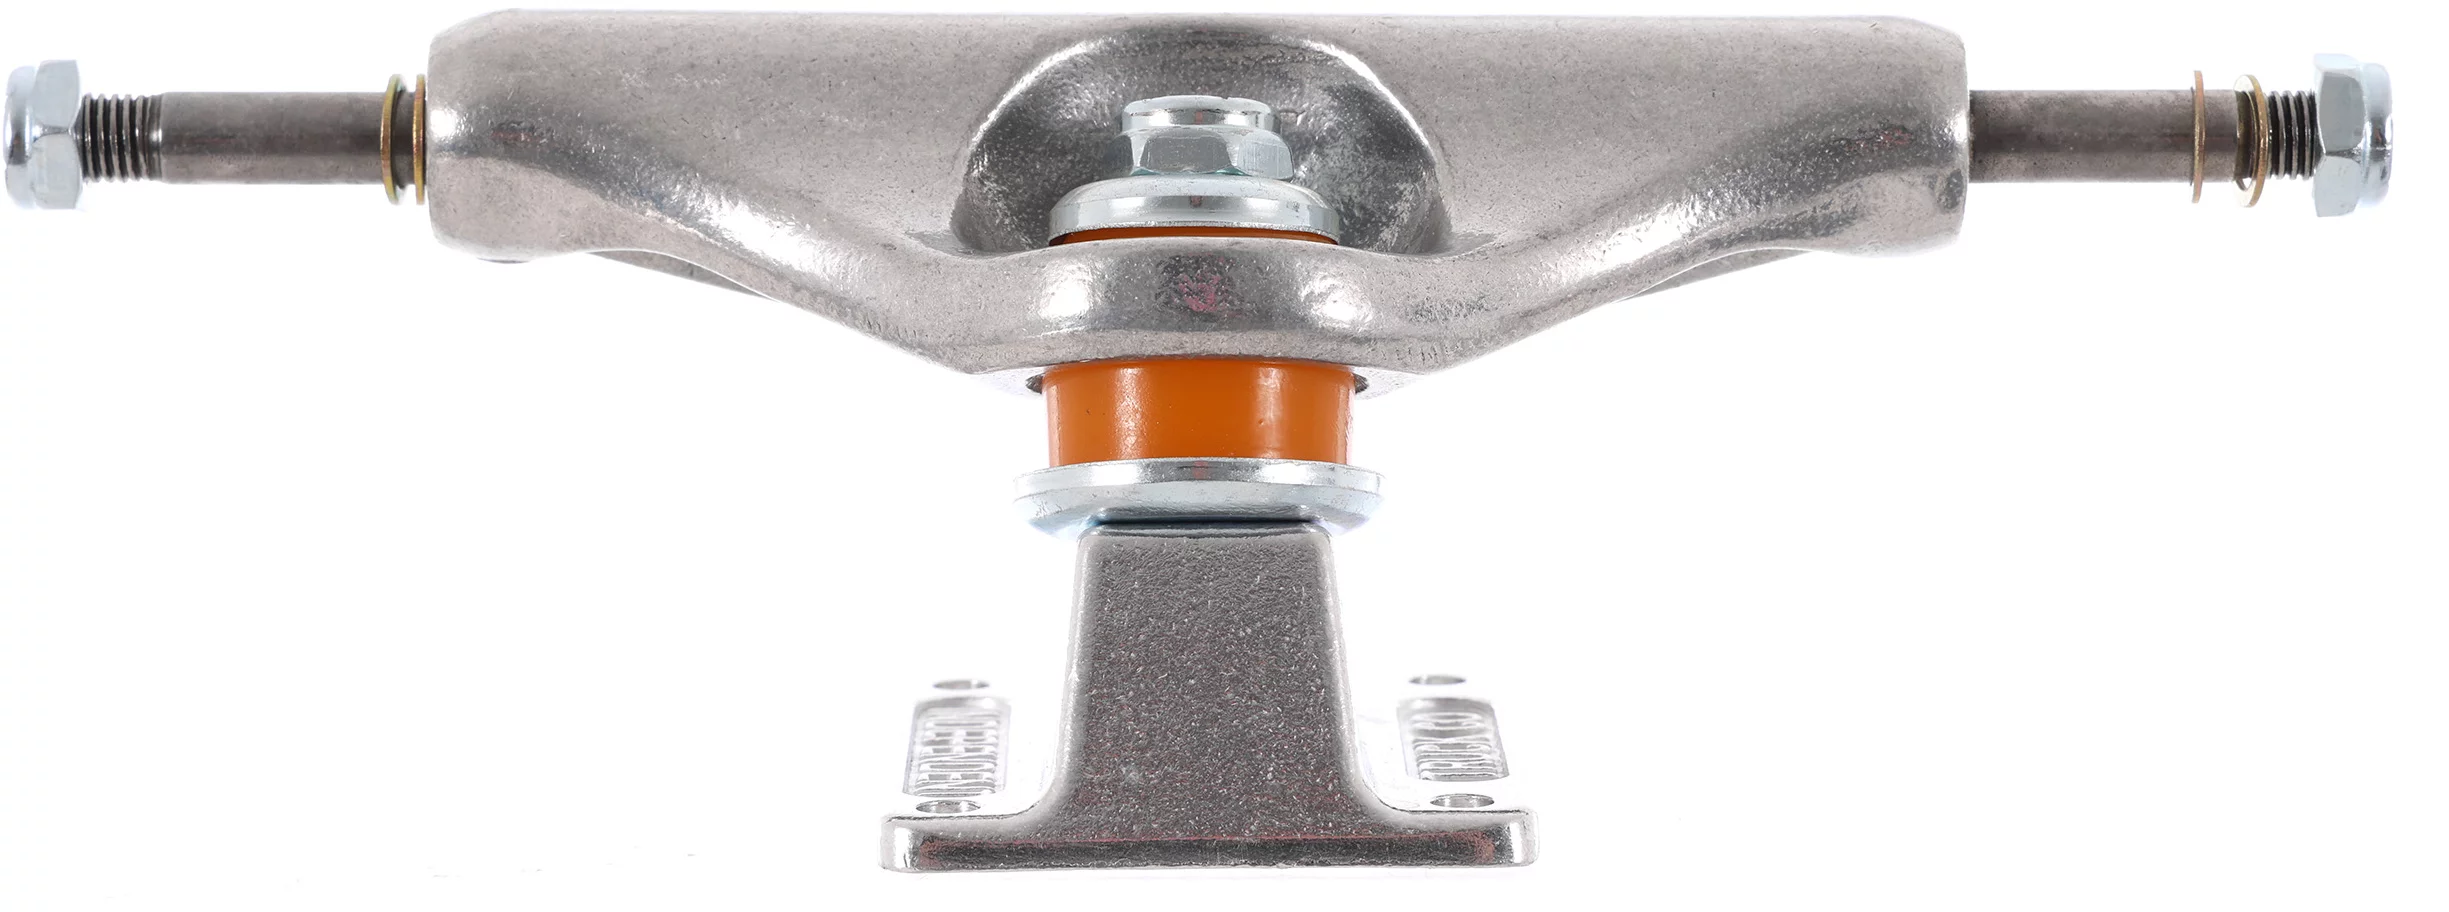 Independent Forged Hollow Stage 11 Skateboard Trucks - silver 139 